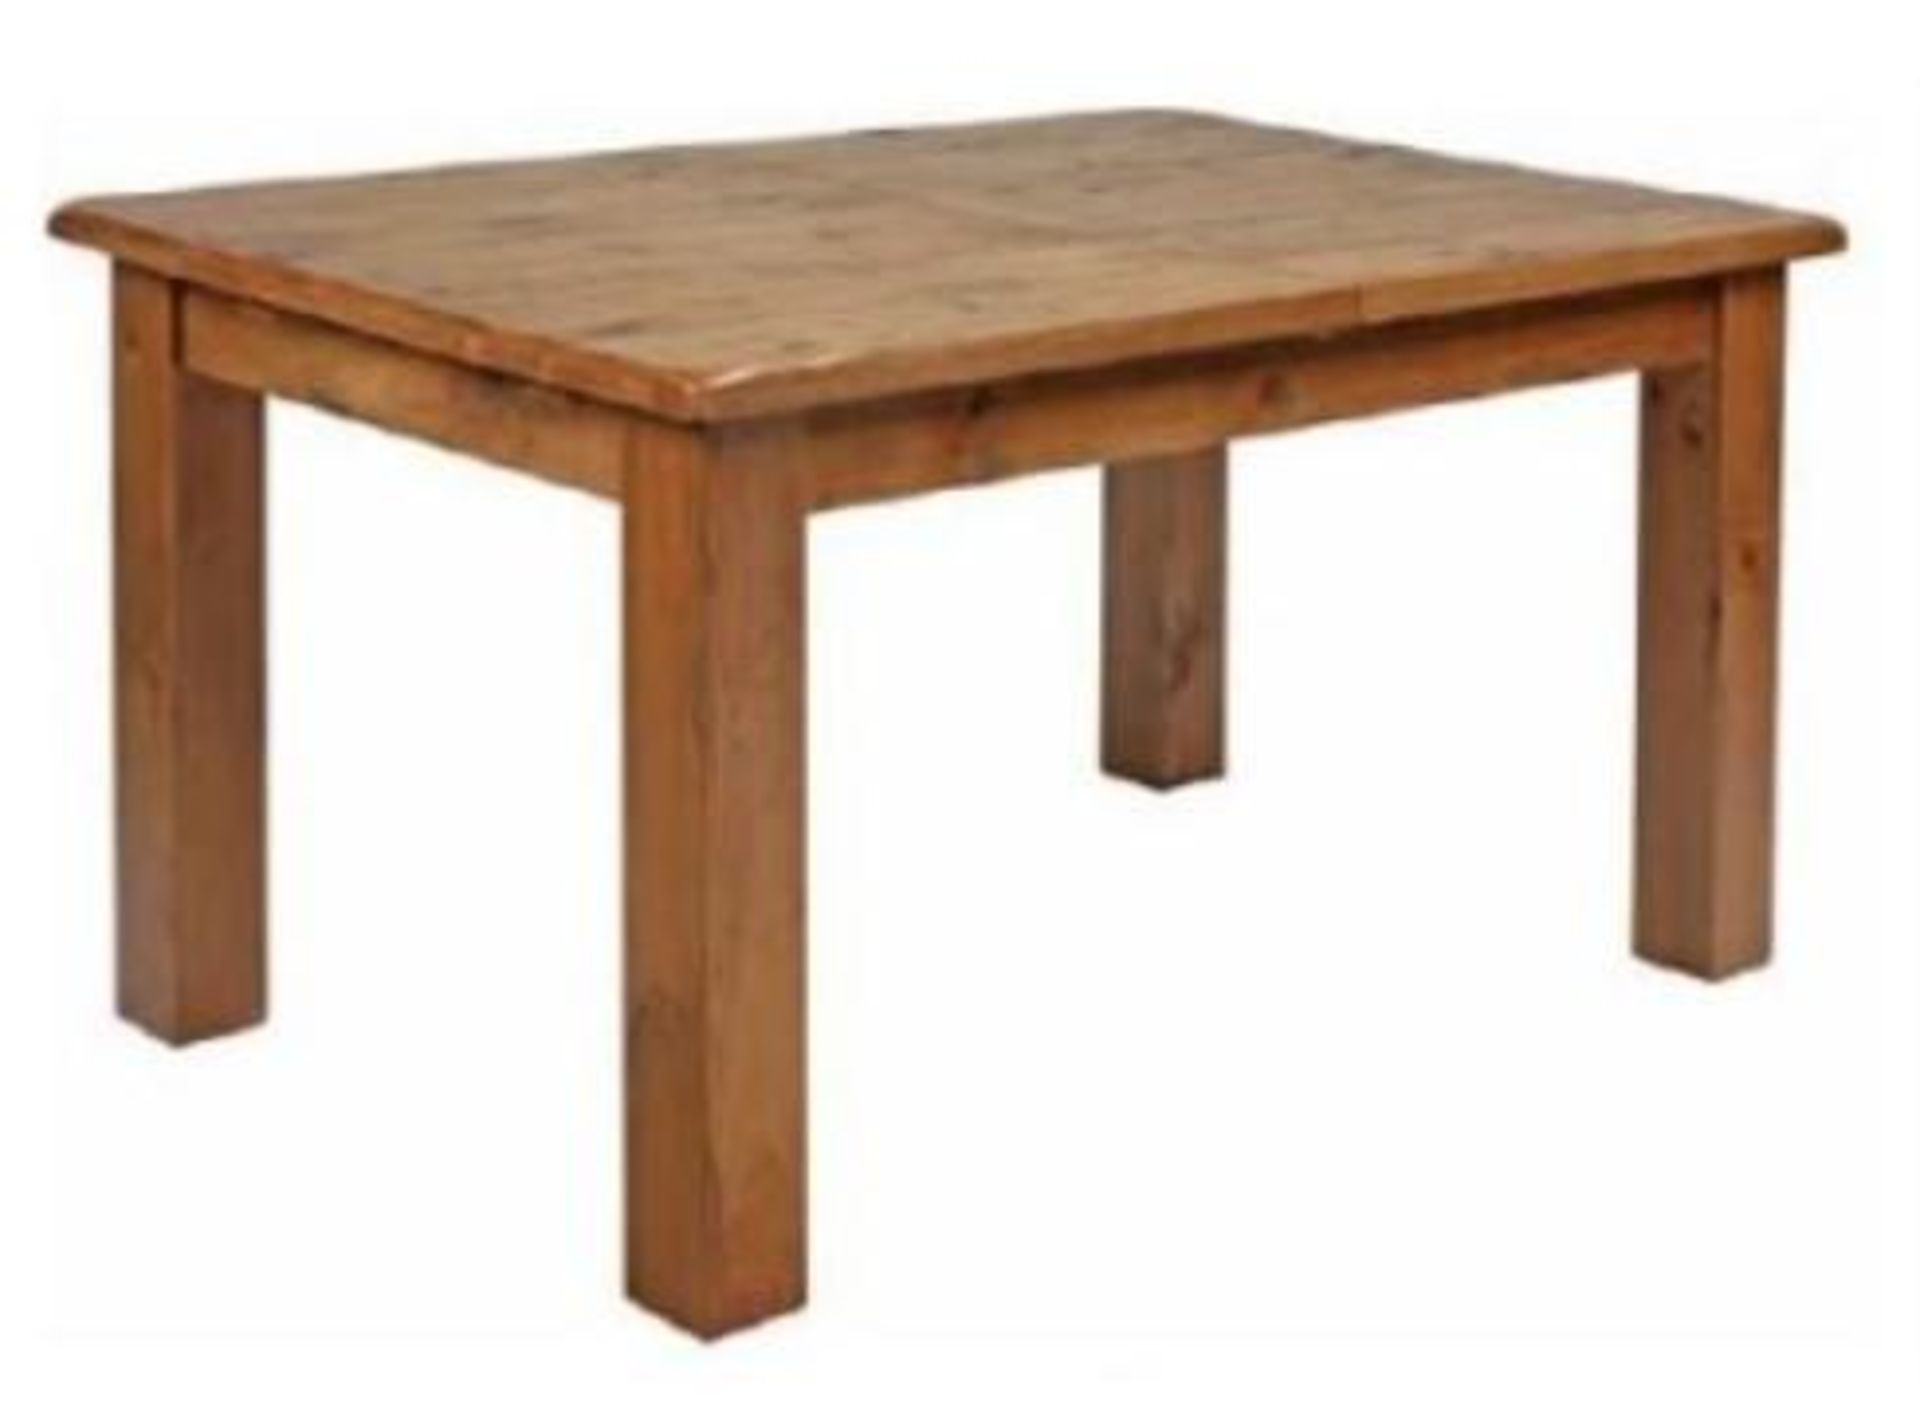 BRAND NEW & BOXED Montana Dining Table